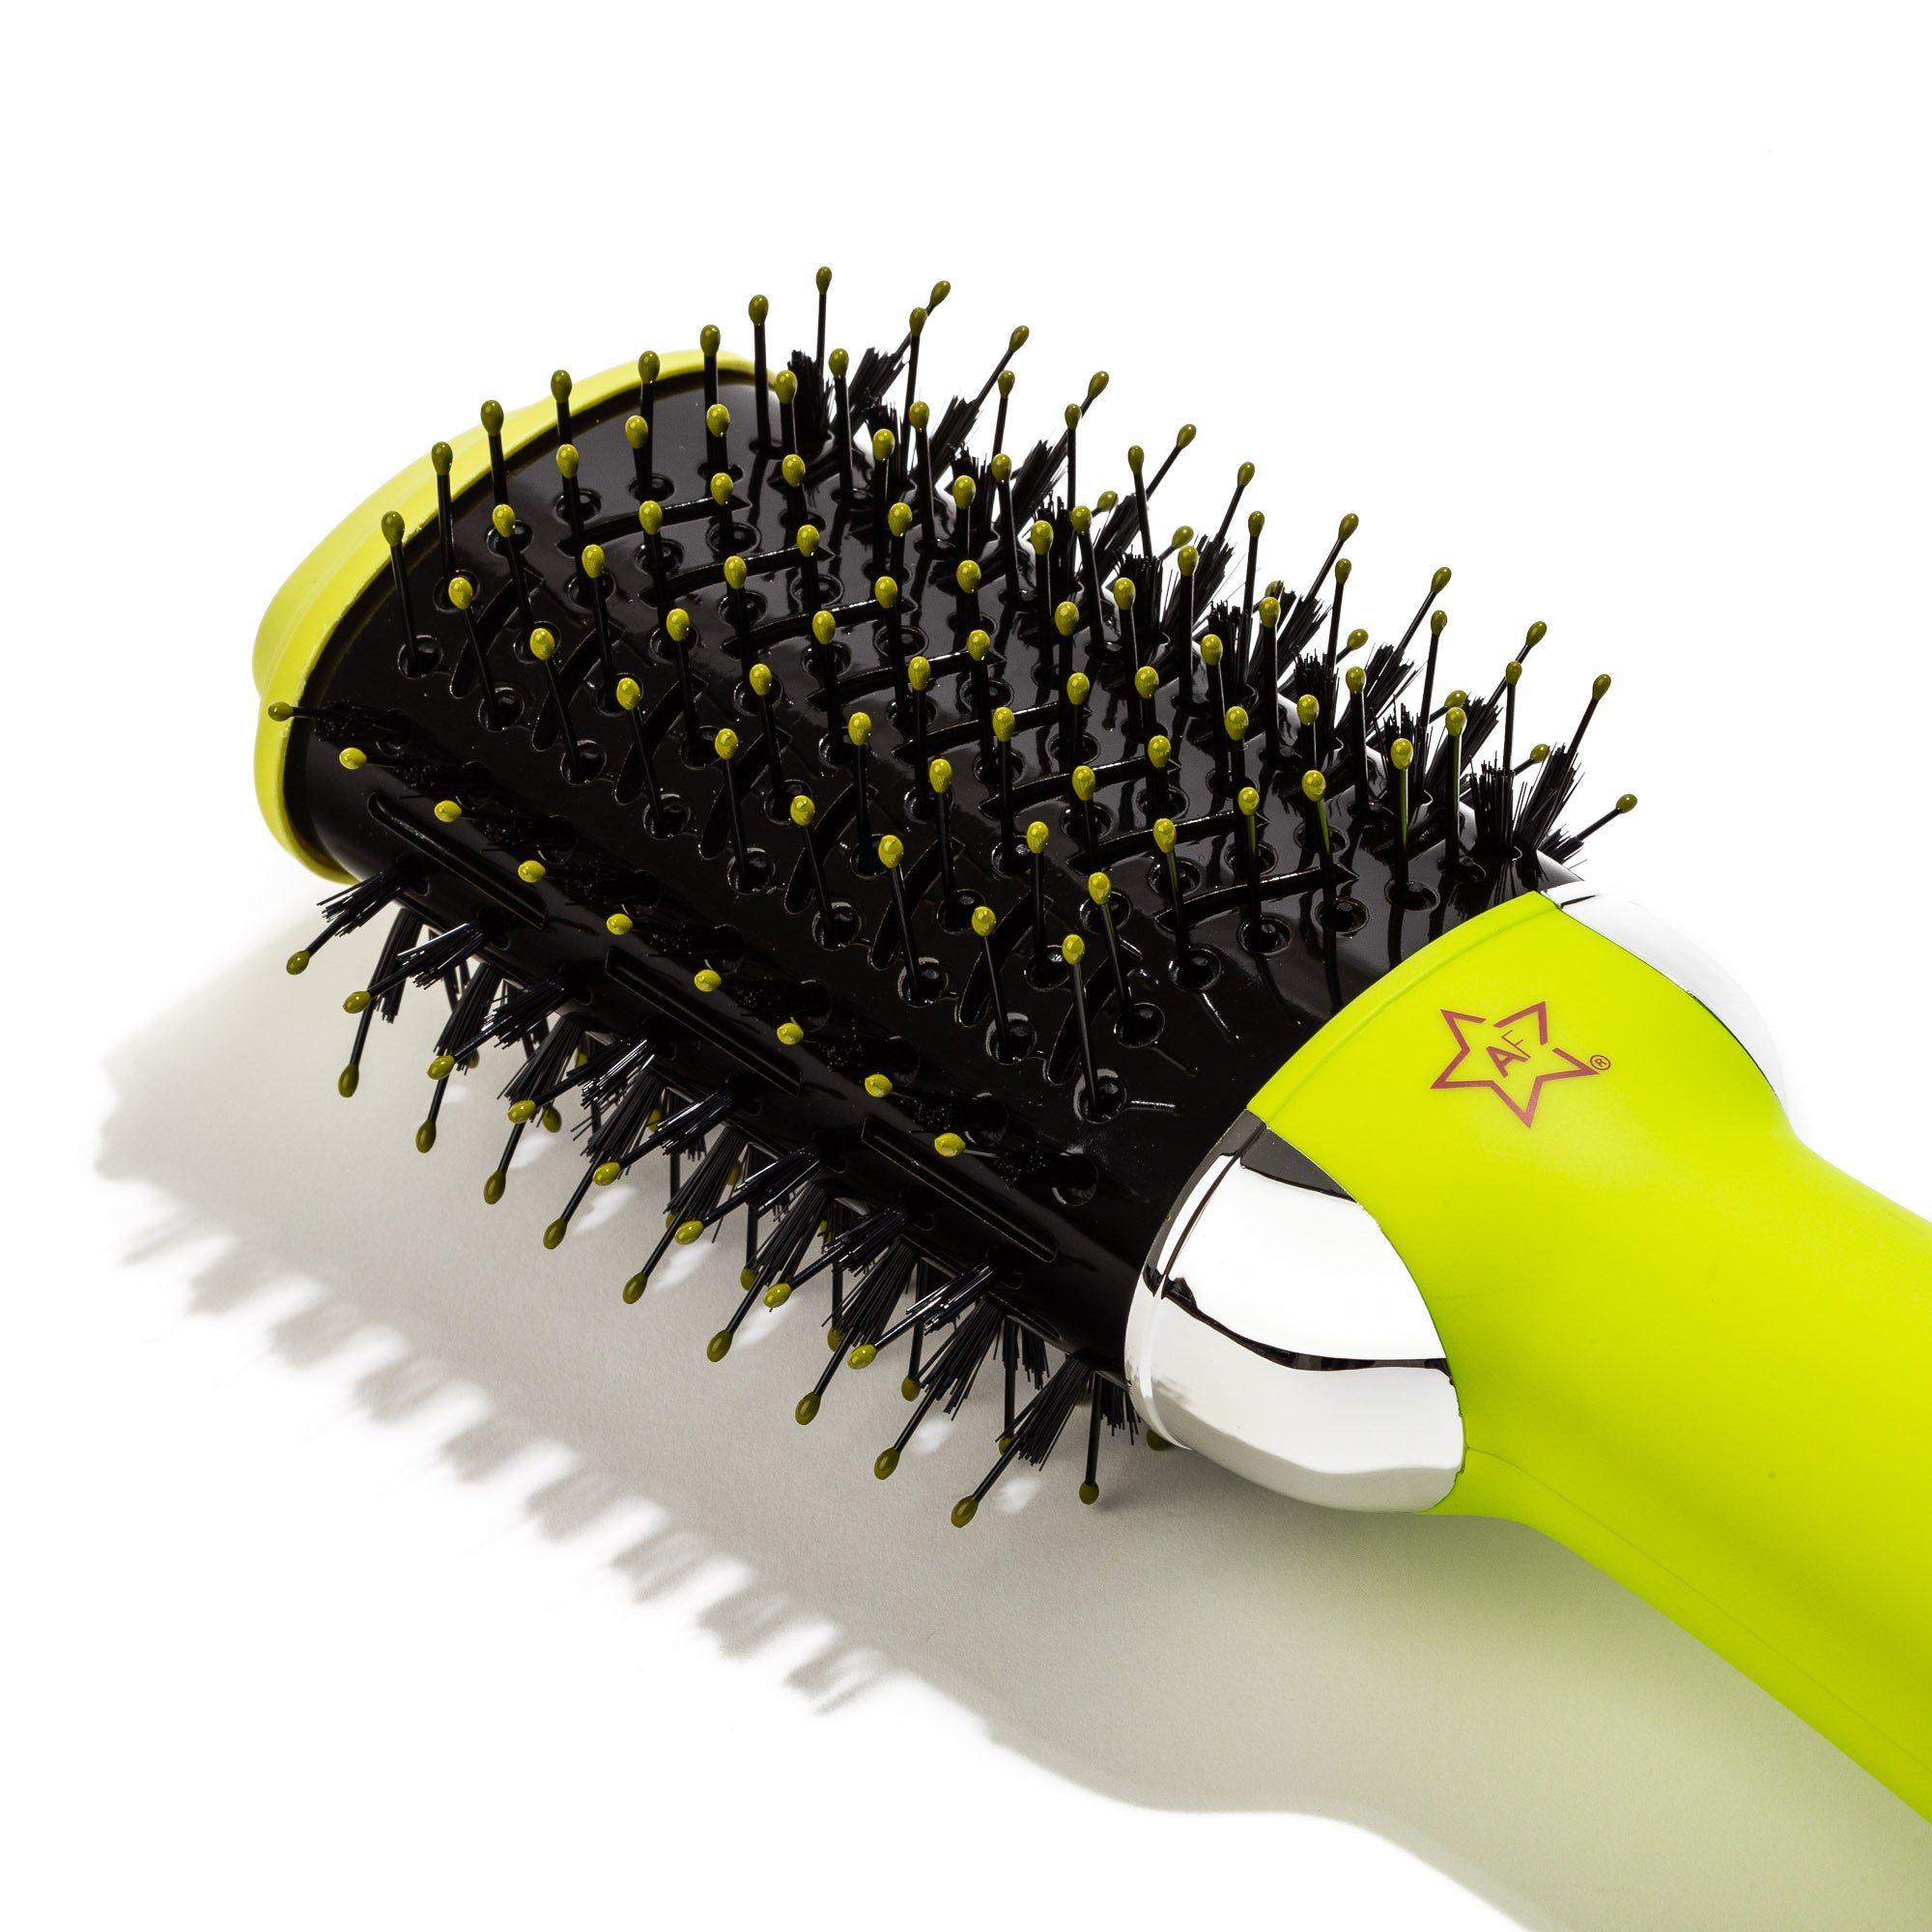 New 3in1 Blowout Brush Styling Tool - California Collection/Yellow